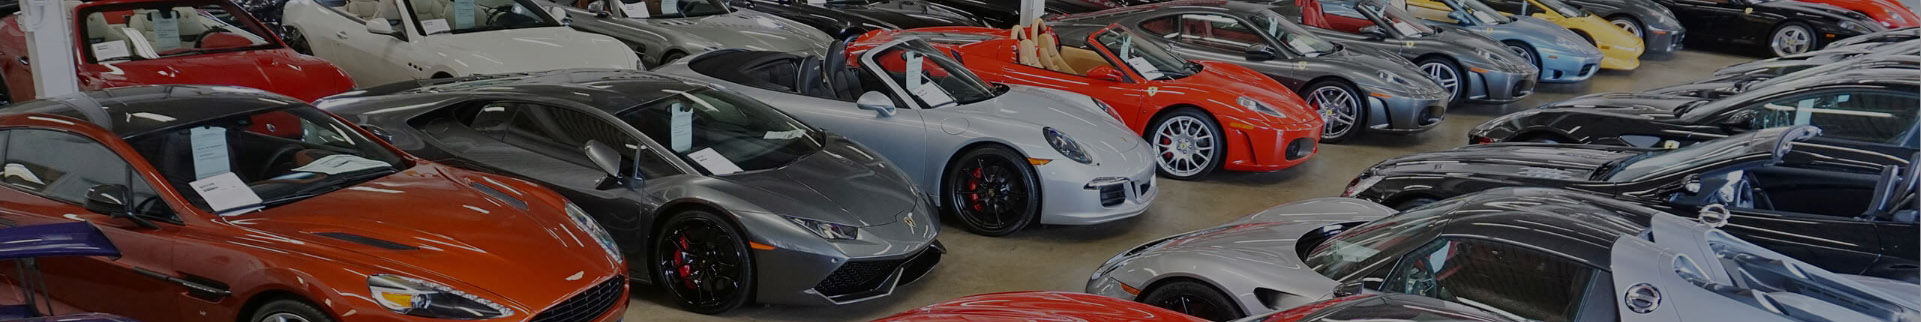 pre-owned luxury cars for sale at Marshall Goldman Newport Beach in Orange County